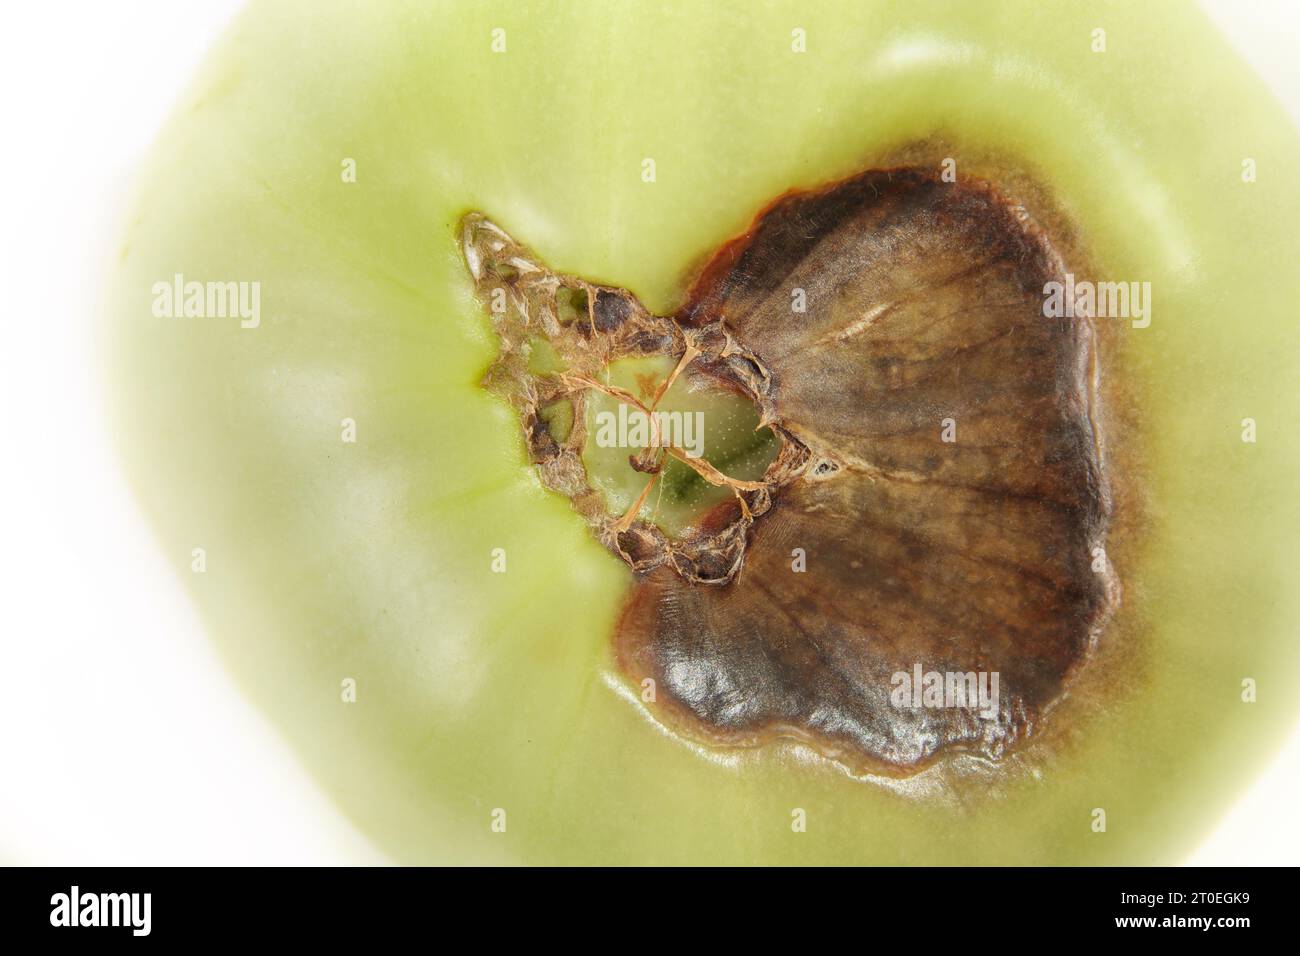 Top view of blossom end rot disease on tomato. Isolated unripe roadster tomato with rotten brown section from lack of calcium. White background. Selec Stock Photo